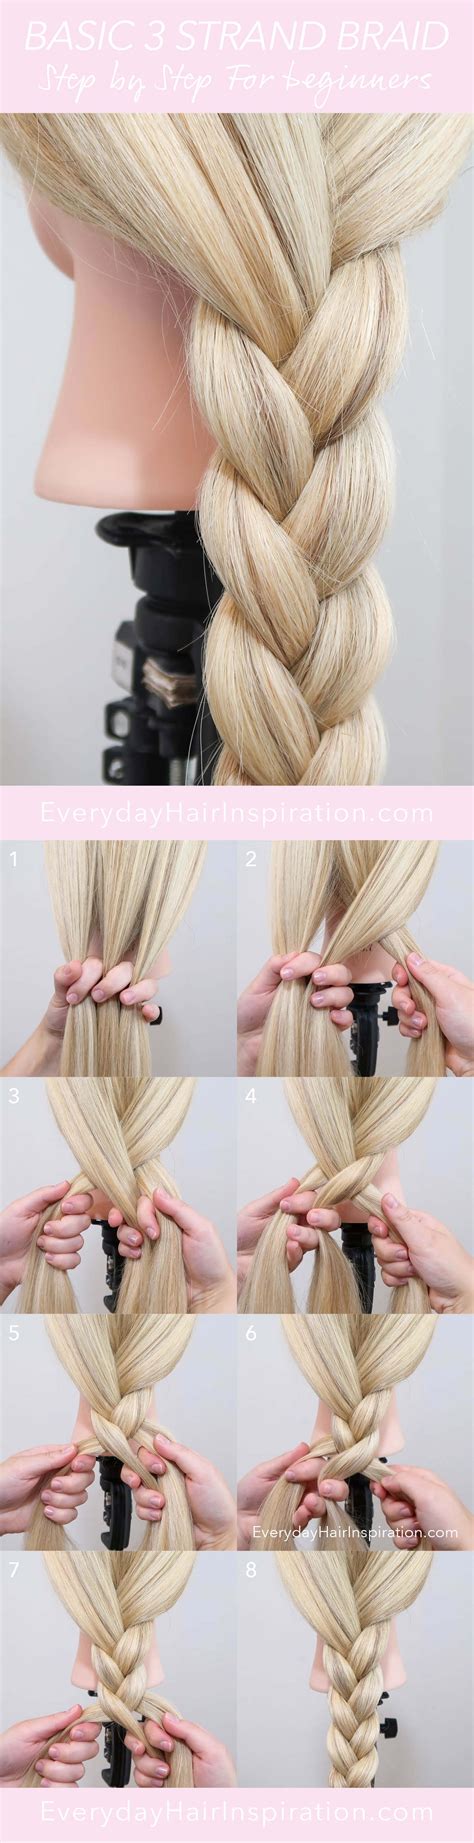 Unique How To Plait Hair Step By Step For Beginners With Simple Style